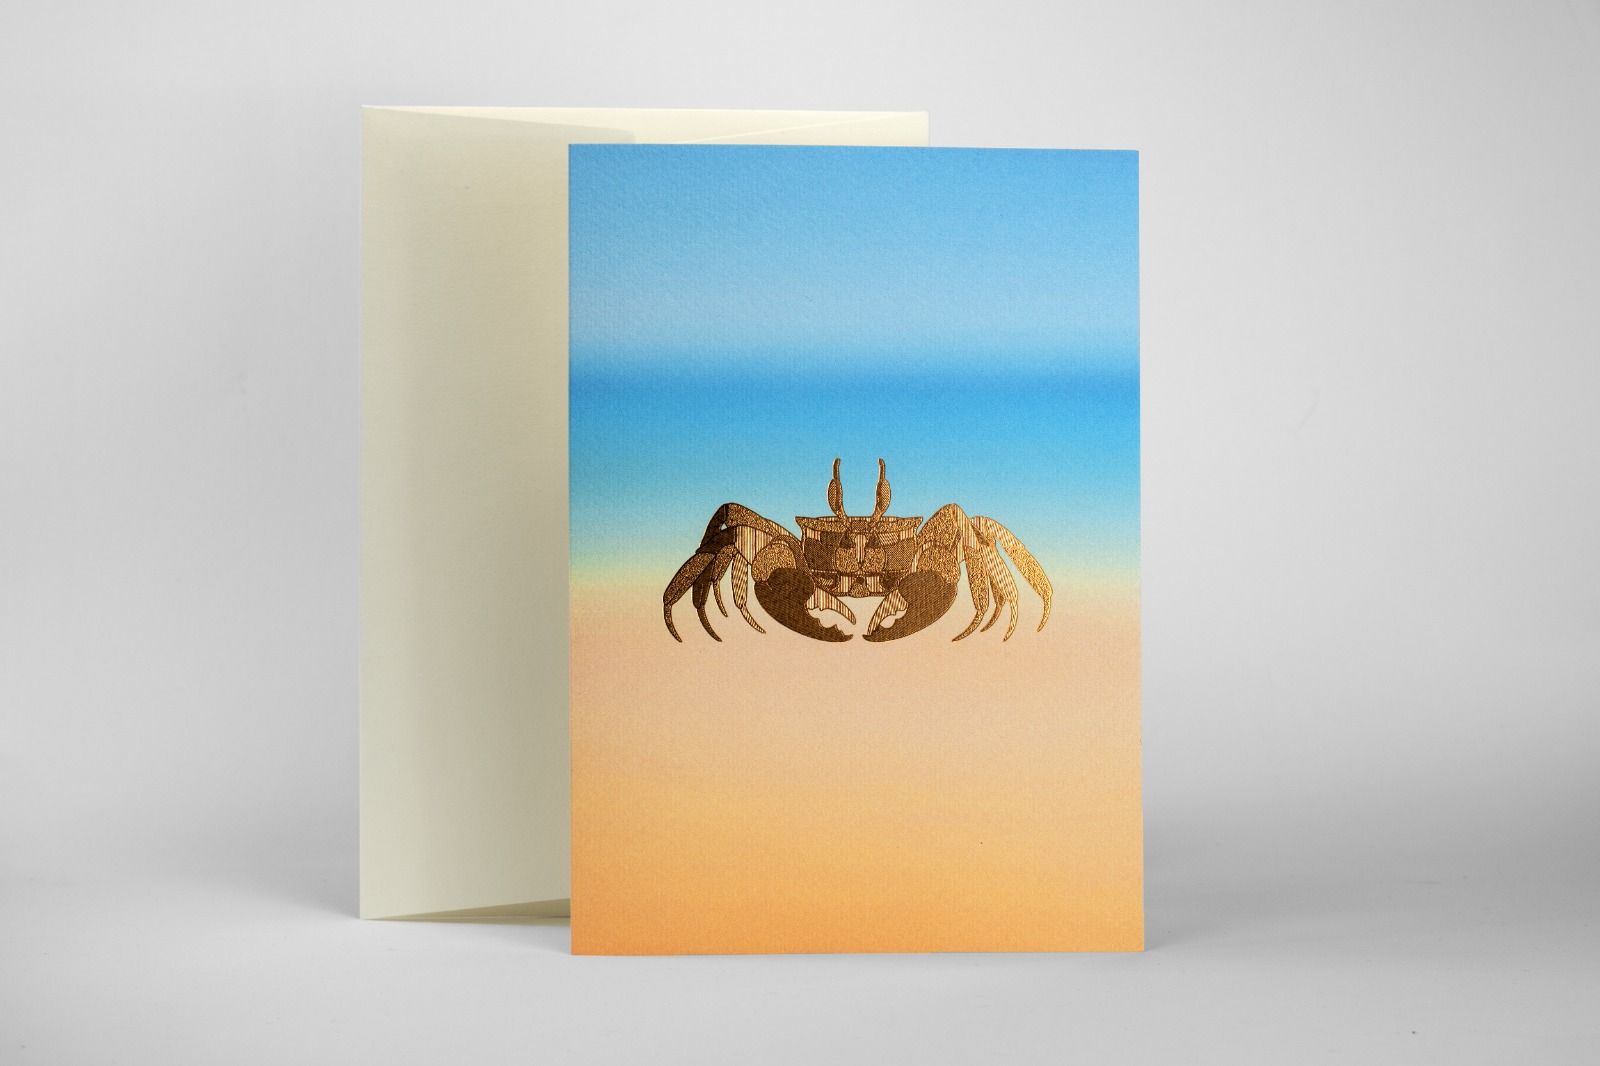 Bronze foil stamped crab note card on recycled textured stock 350gsm with ivory envelope.